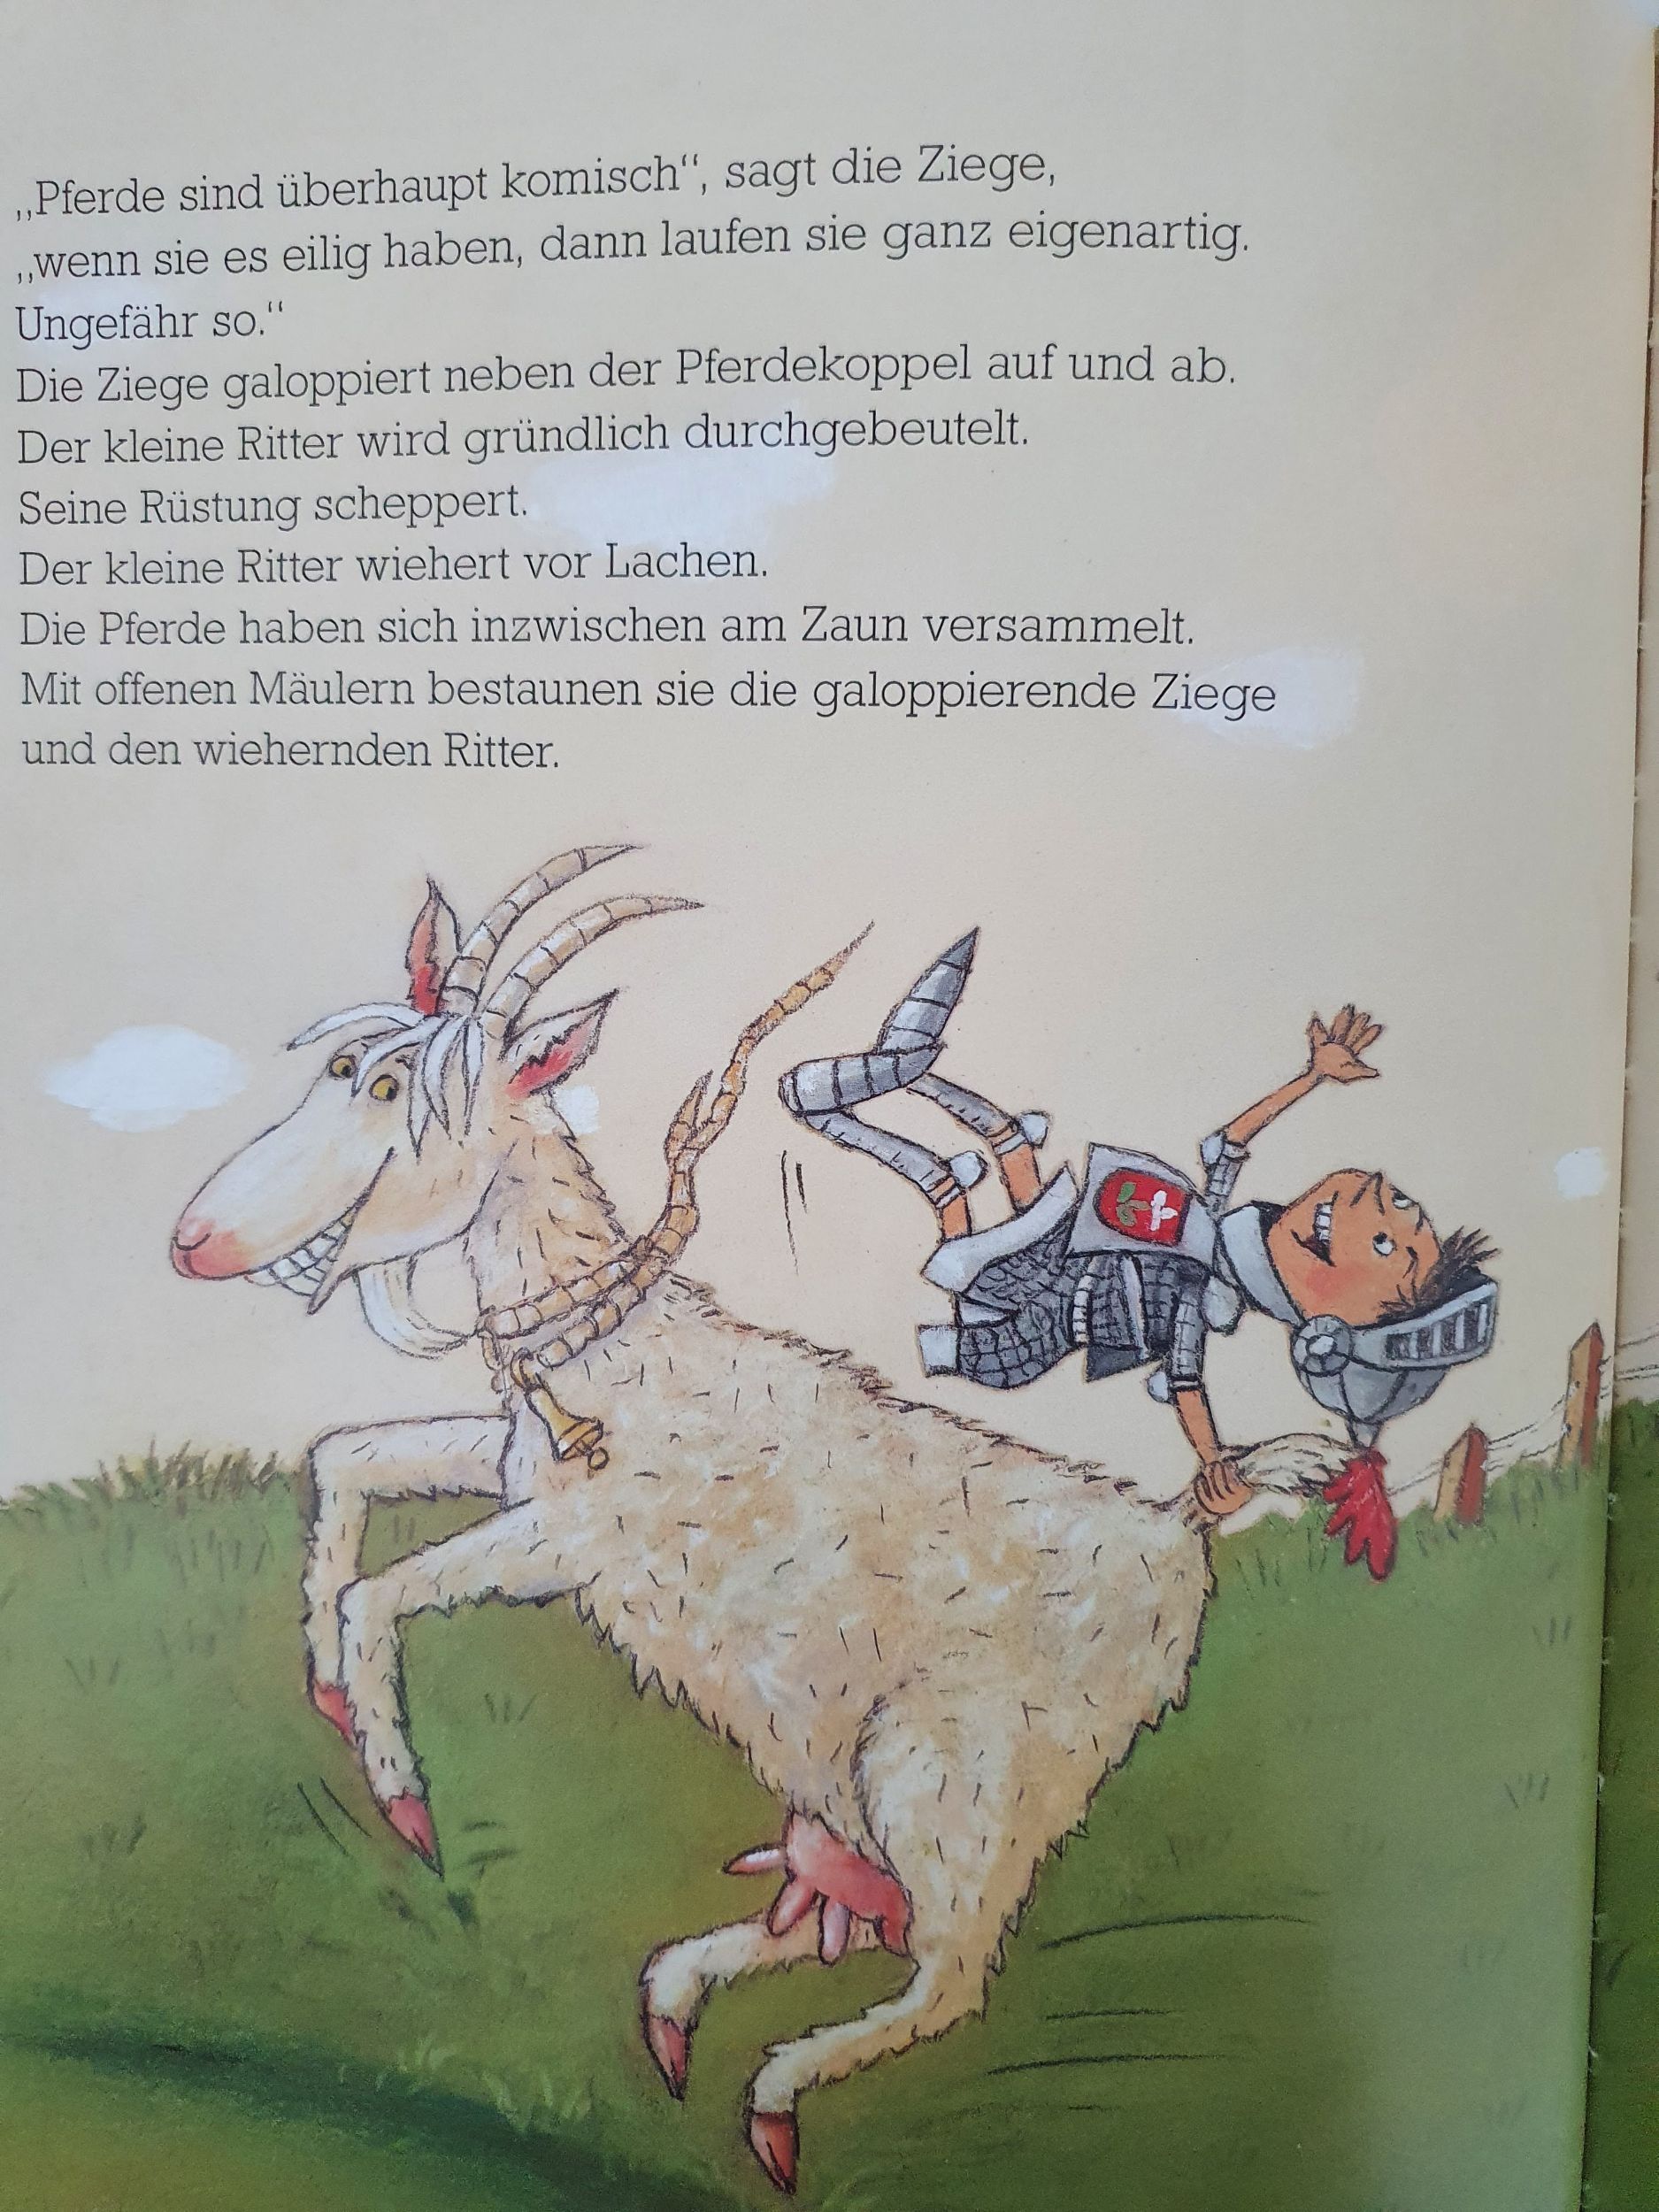 Der Kleine Ritter Like New Not Applicable  (4606867537975)